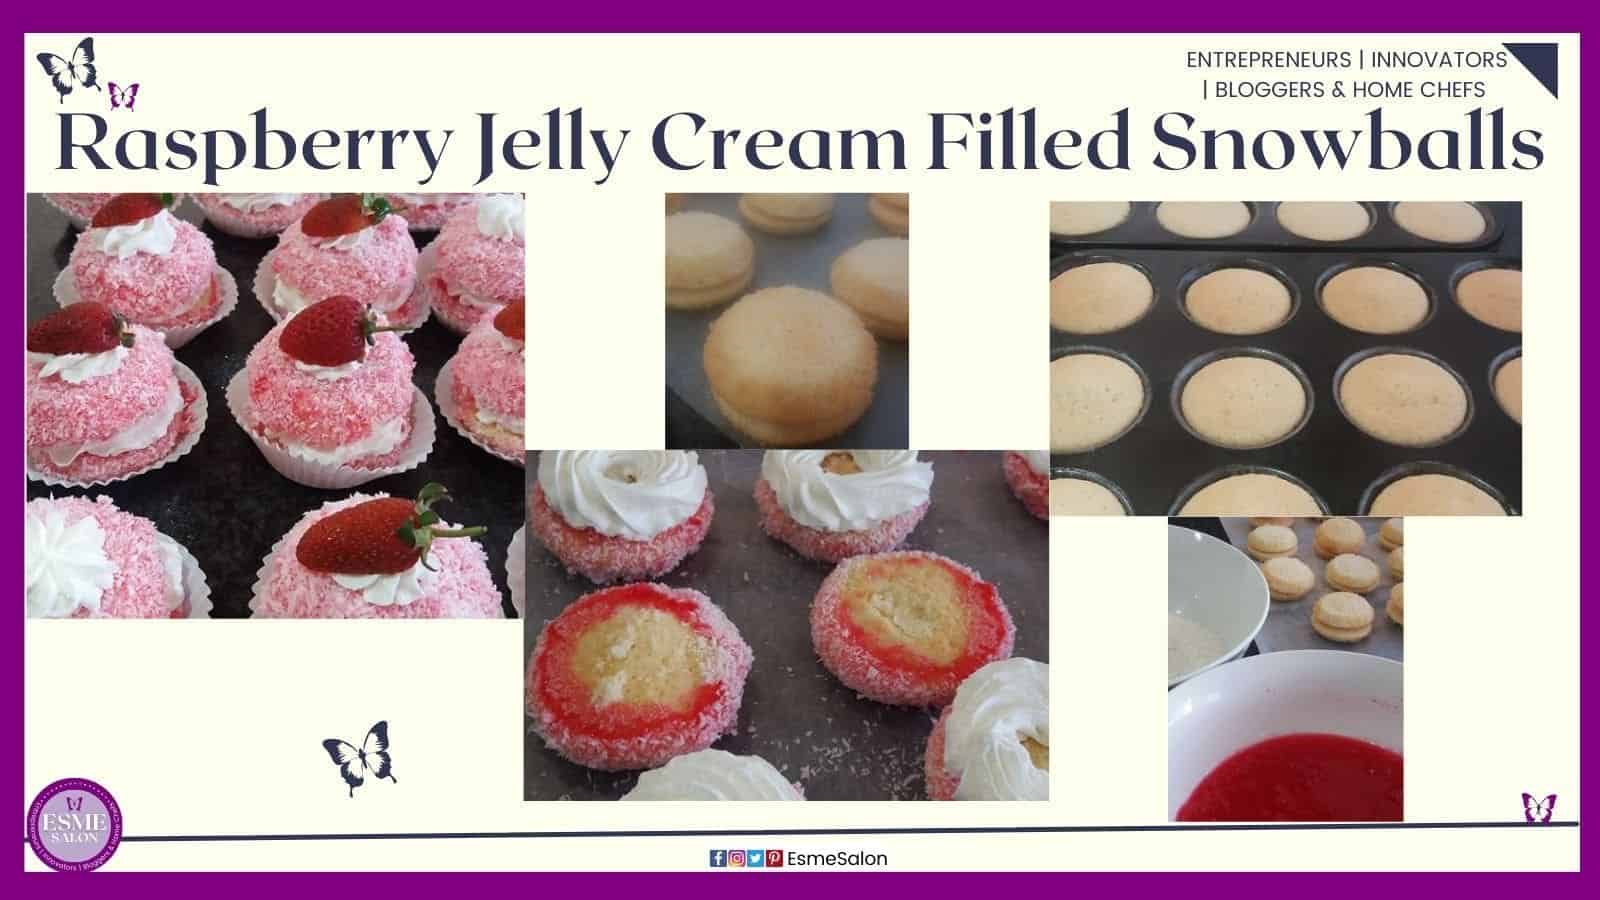 an image of Raspberry Jelly Cream Filled Snowballs as well as some in the making